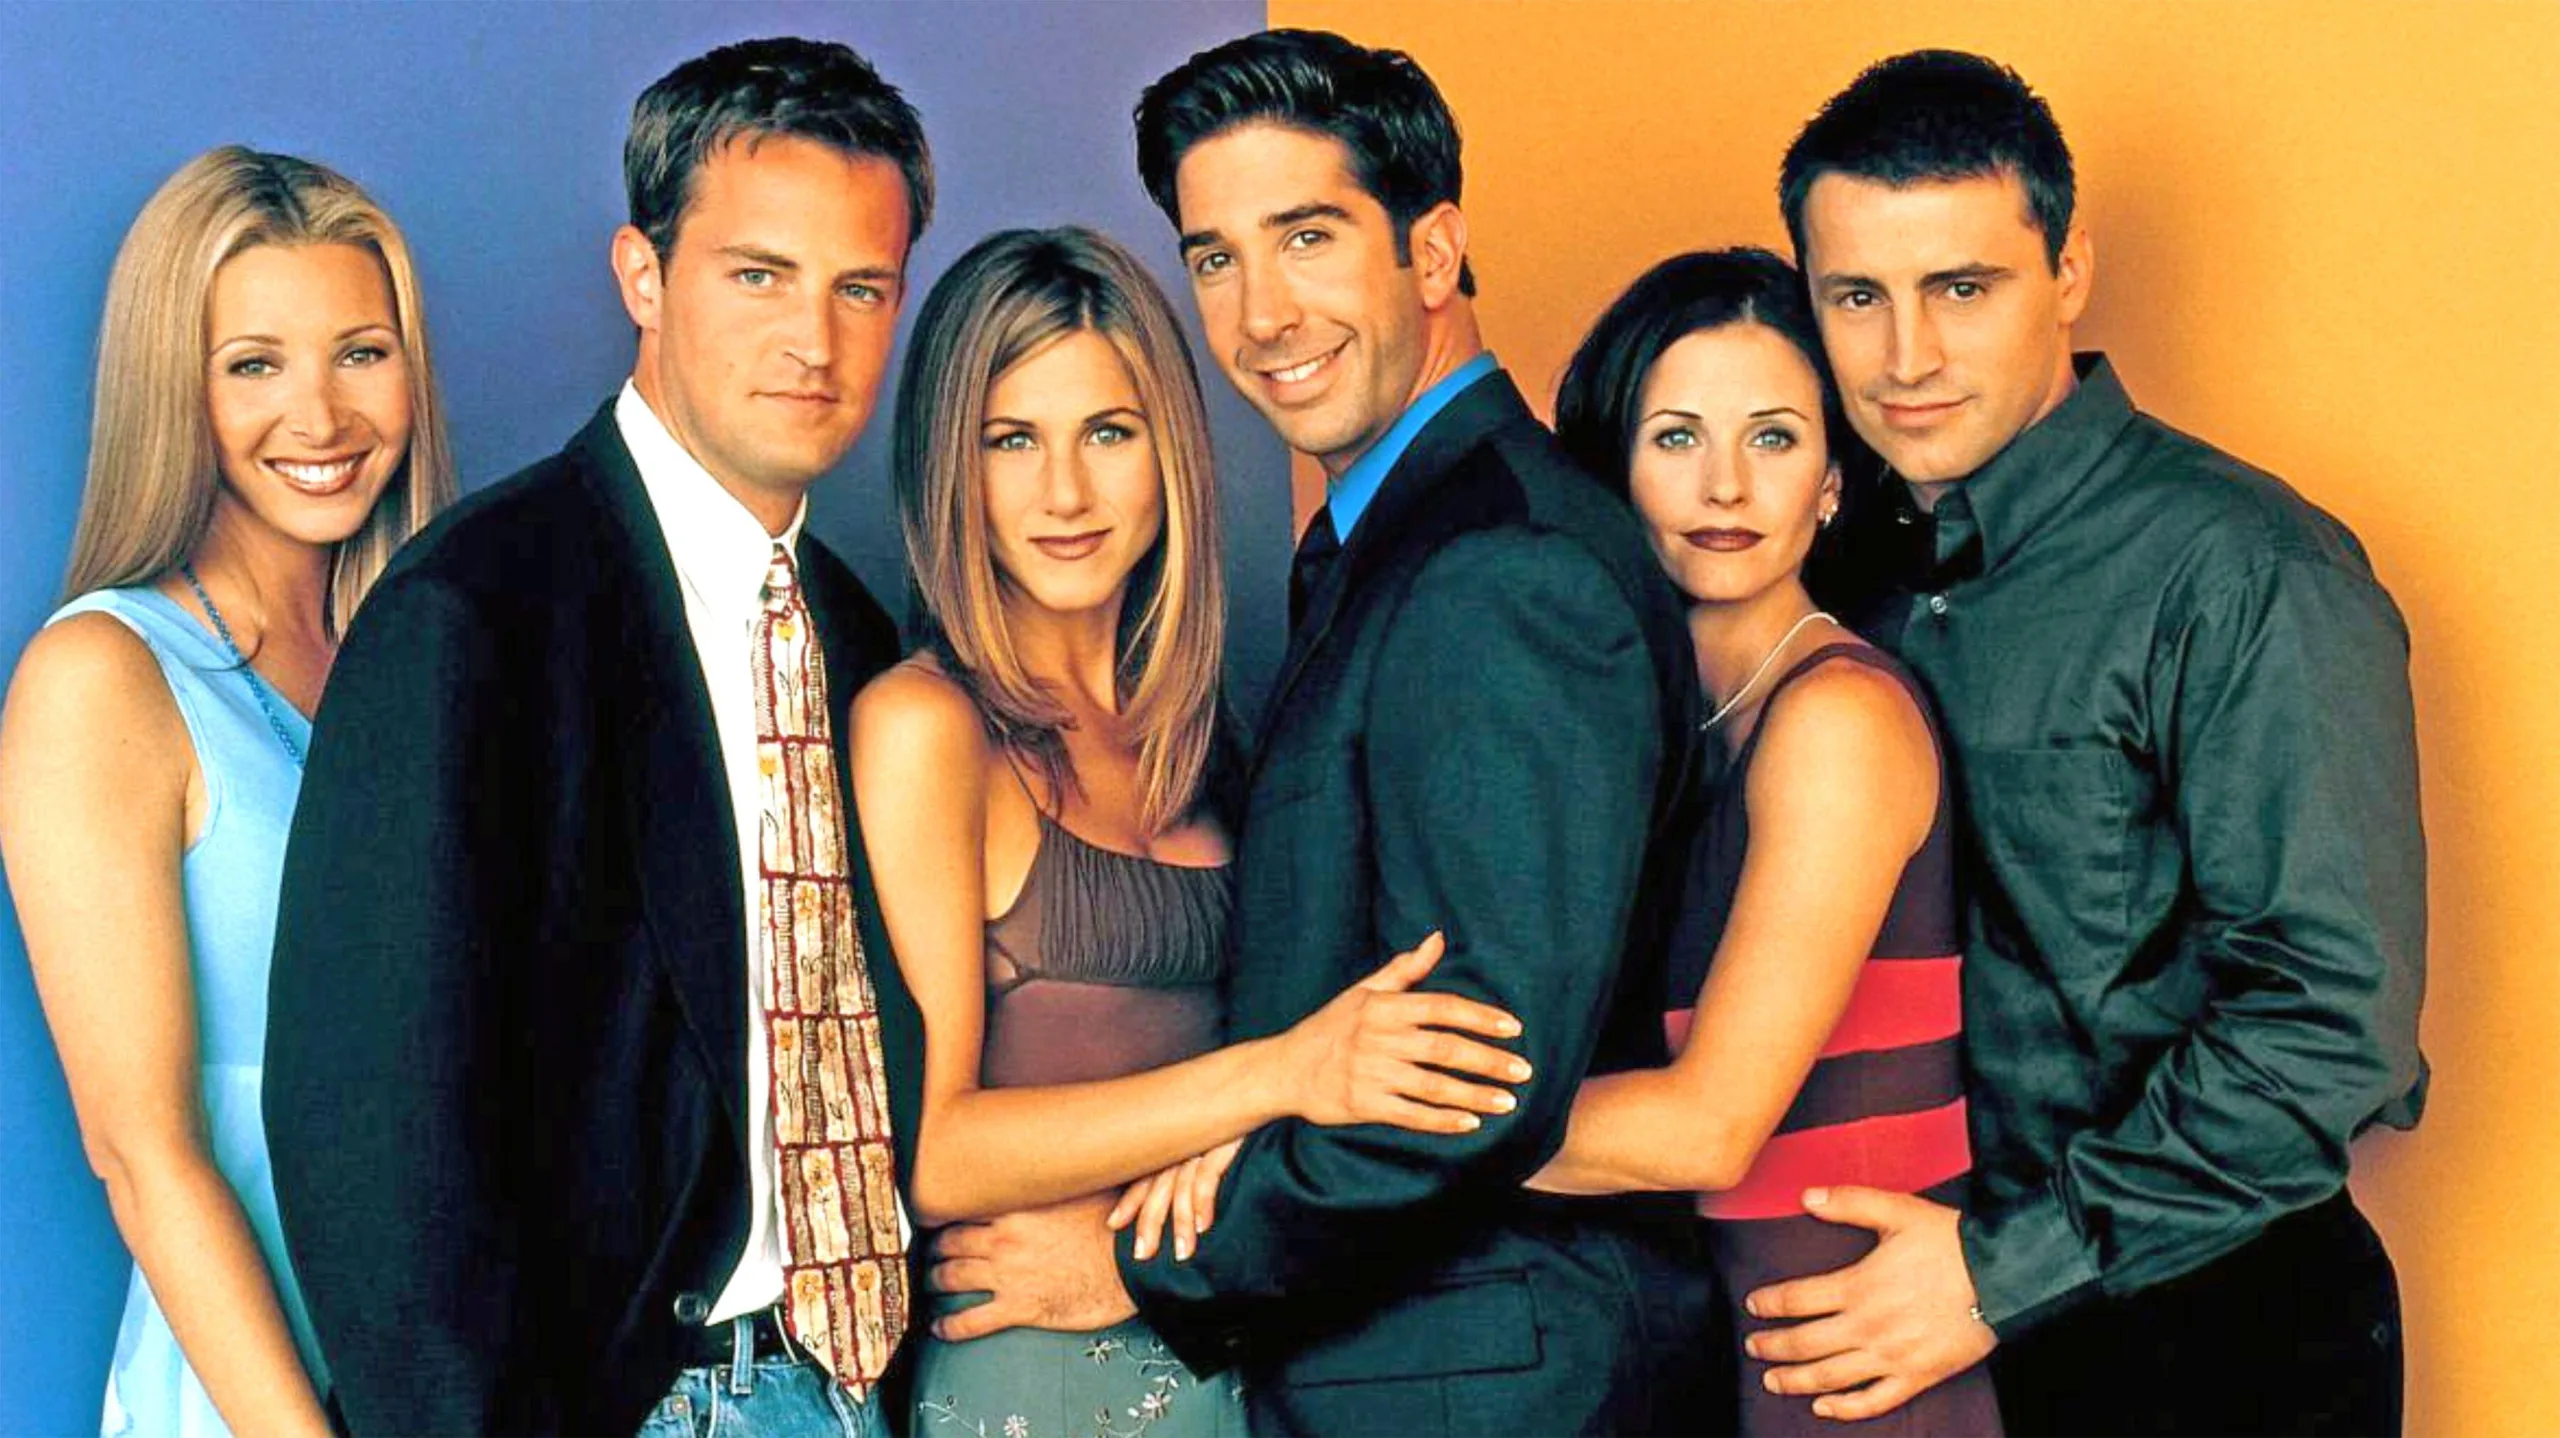 A photograph of the cast of the TV show Friends against a blue and orange background